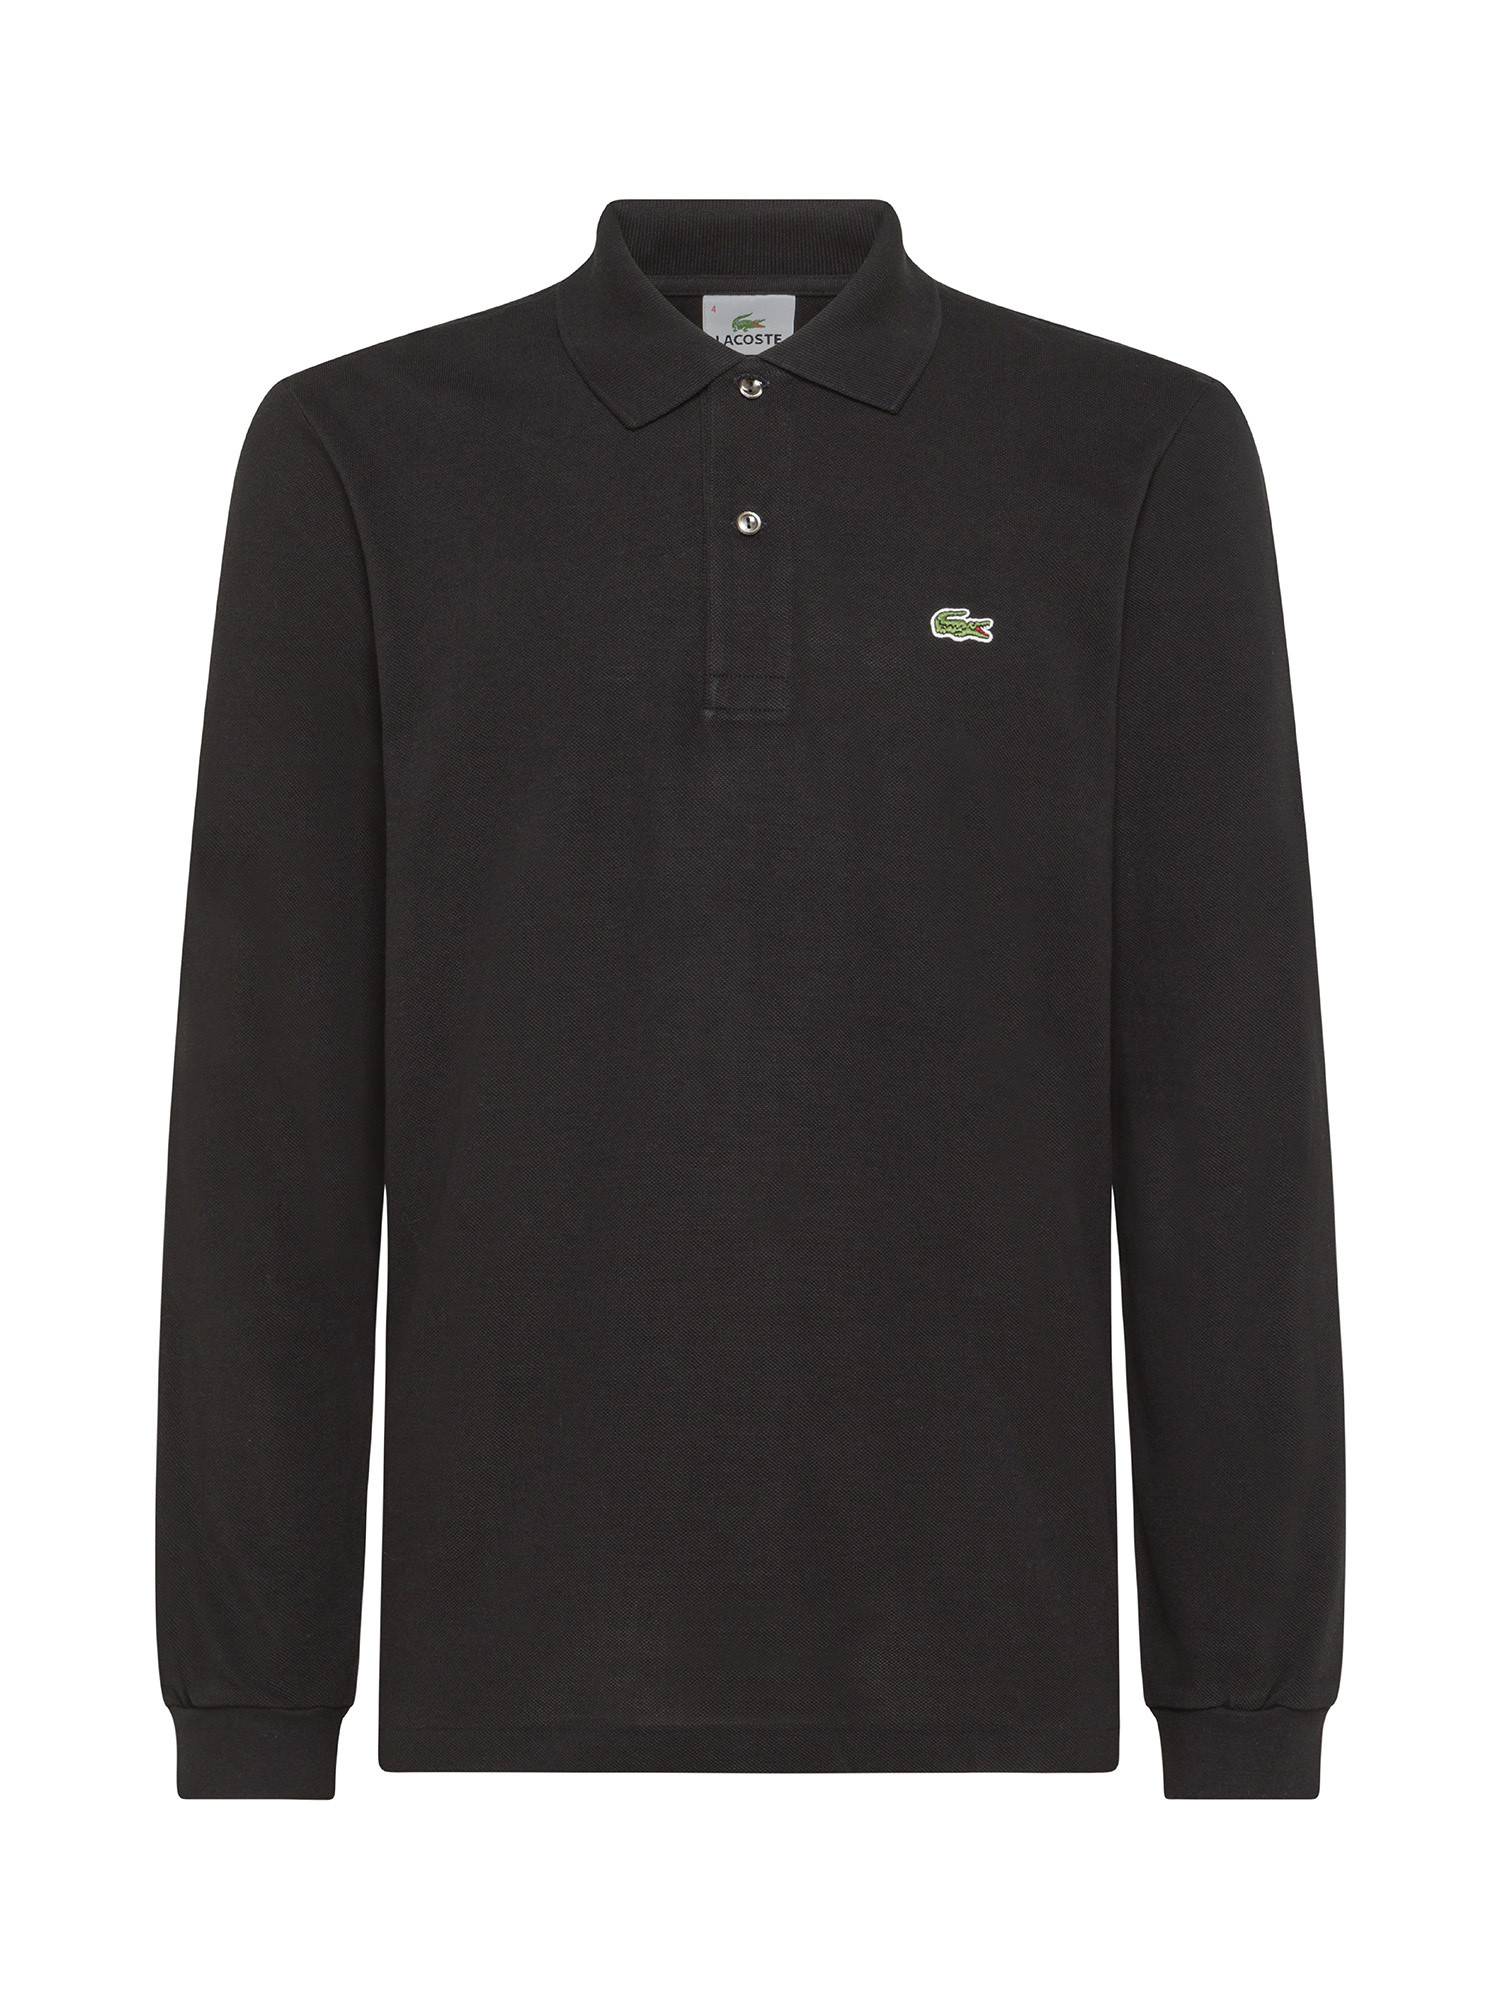 Lacoste - Classic cut polo shirt with long sleeves petit piqué, Black, large image number 0